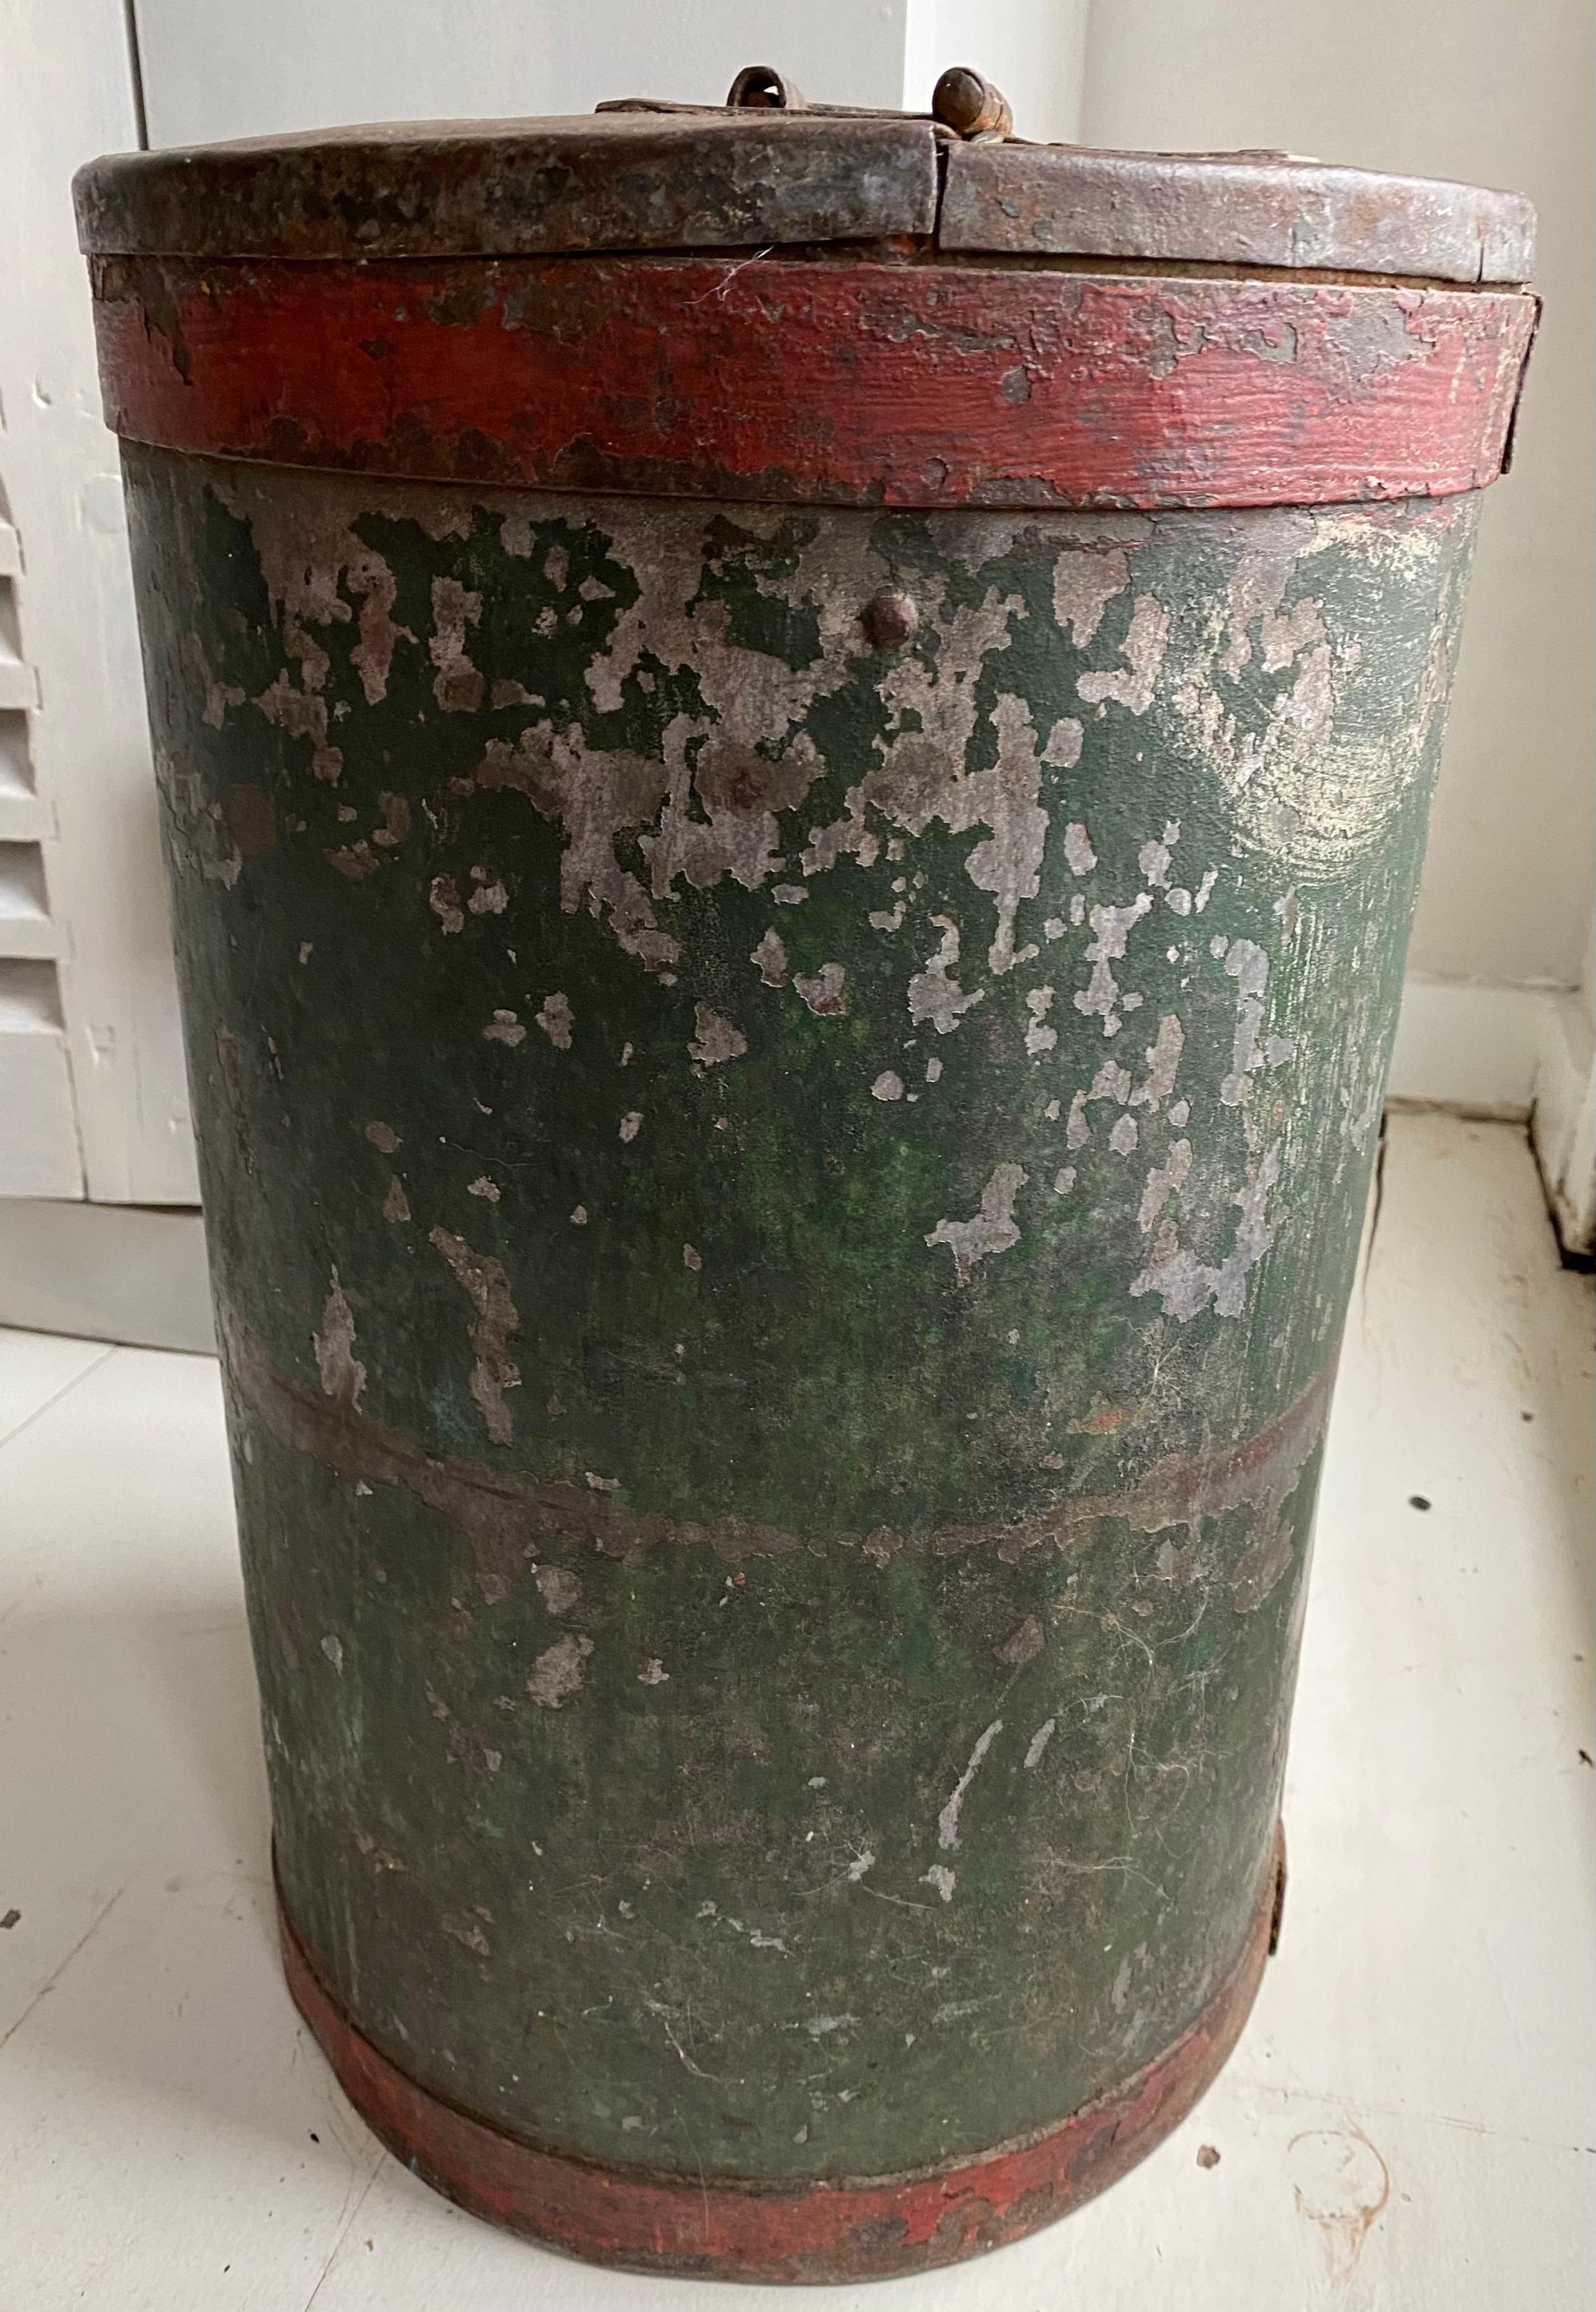 container from india with antique